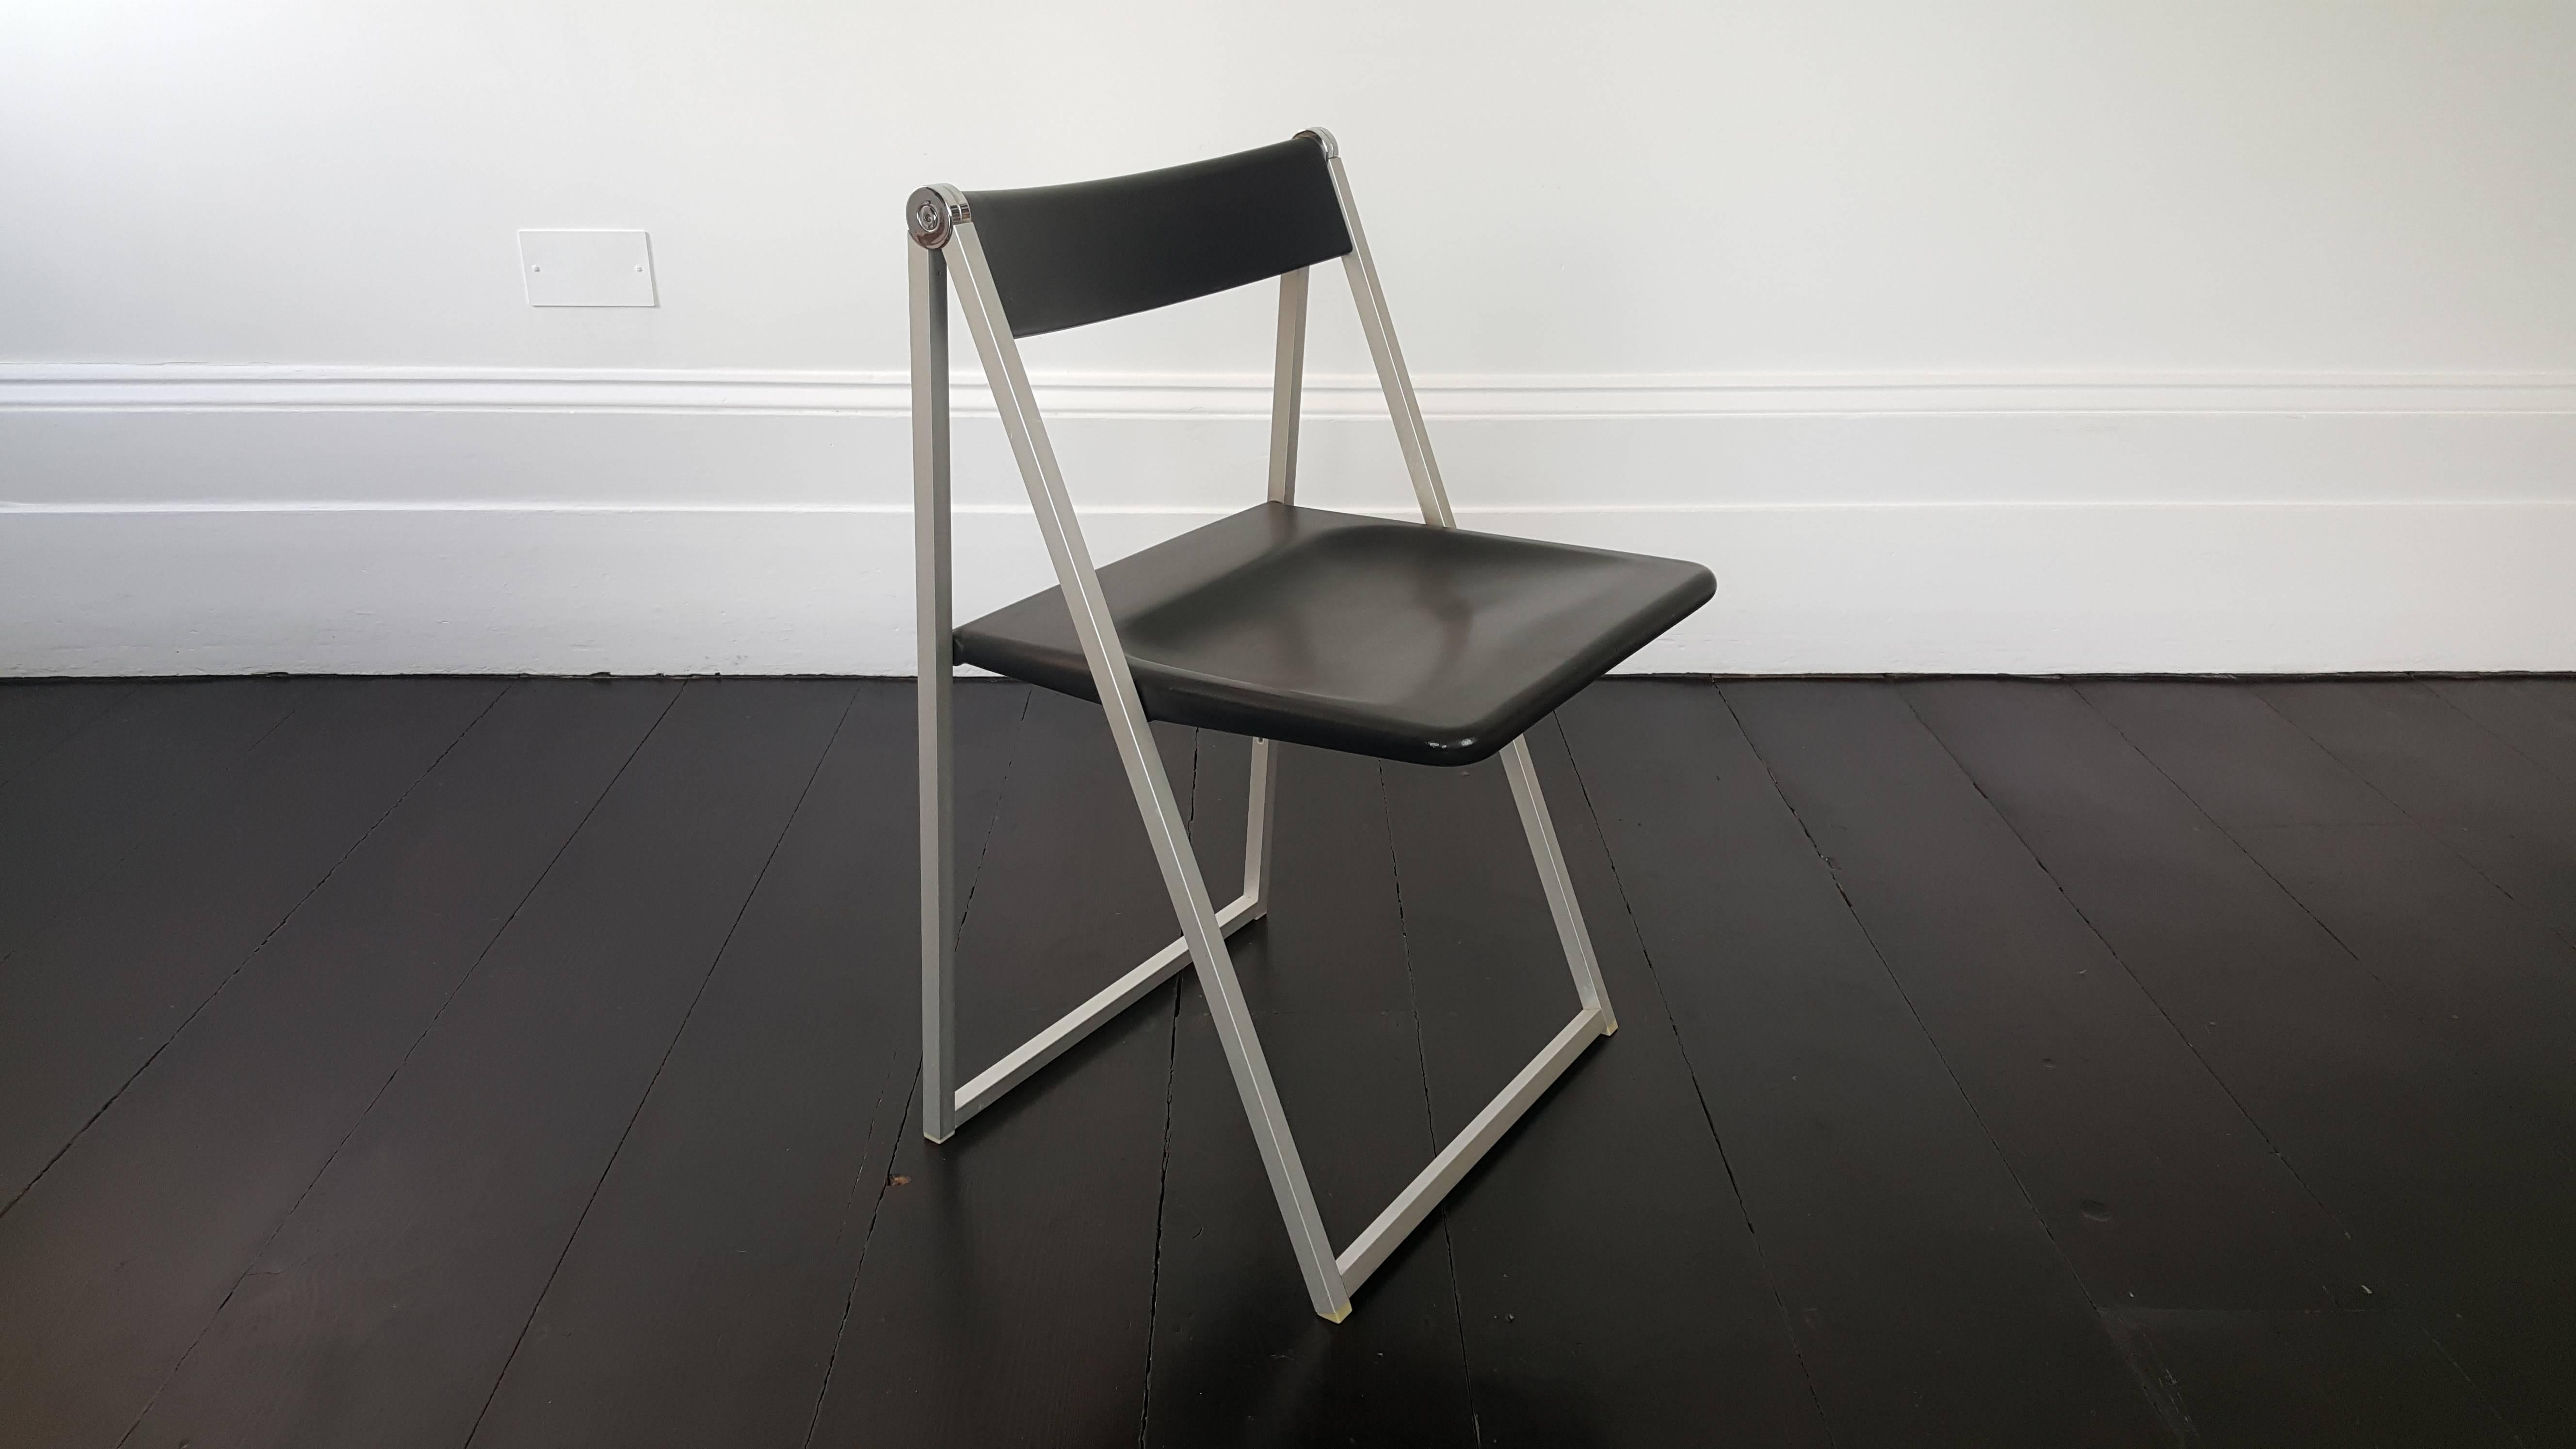 20th Century Folding Chair, Designed in 1971 by Team Form AG, Manufactured by Interlübke